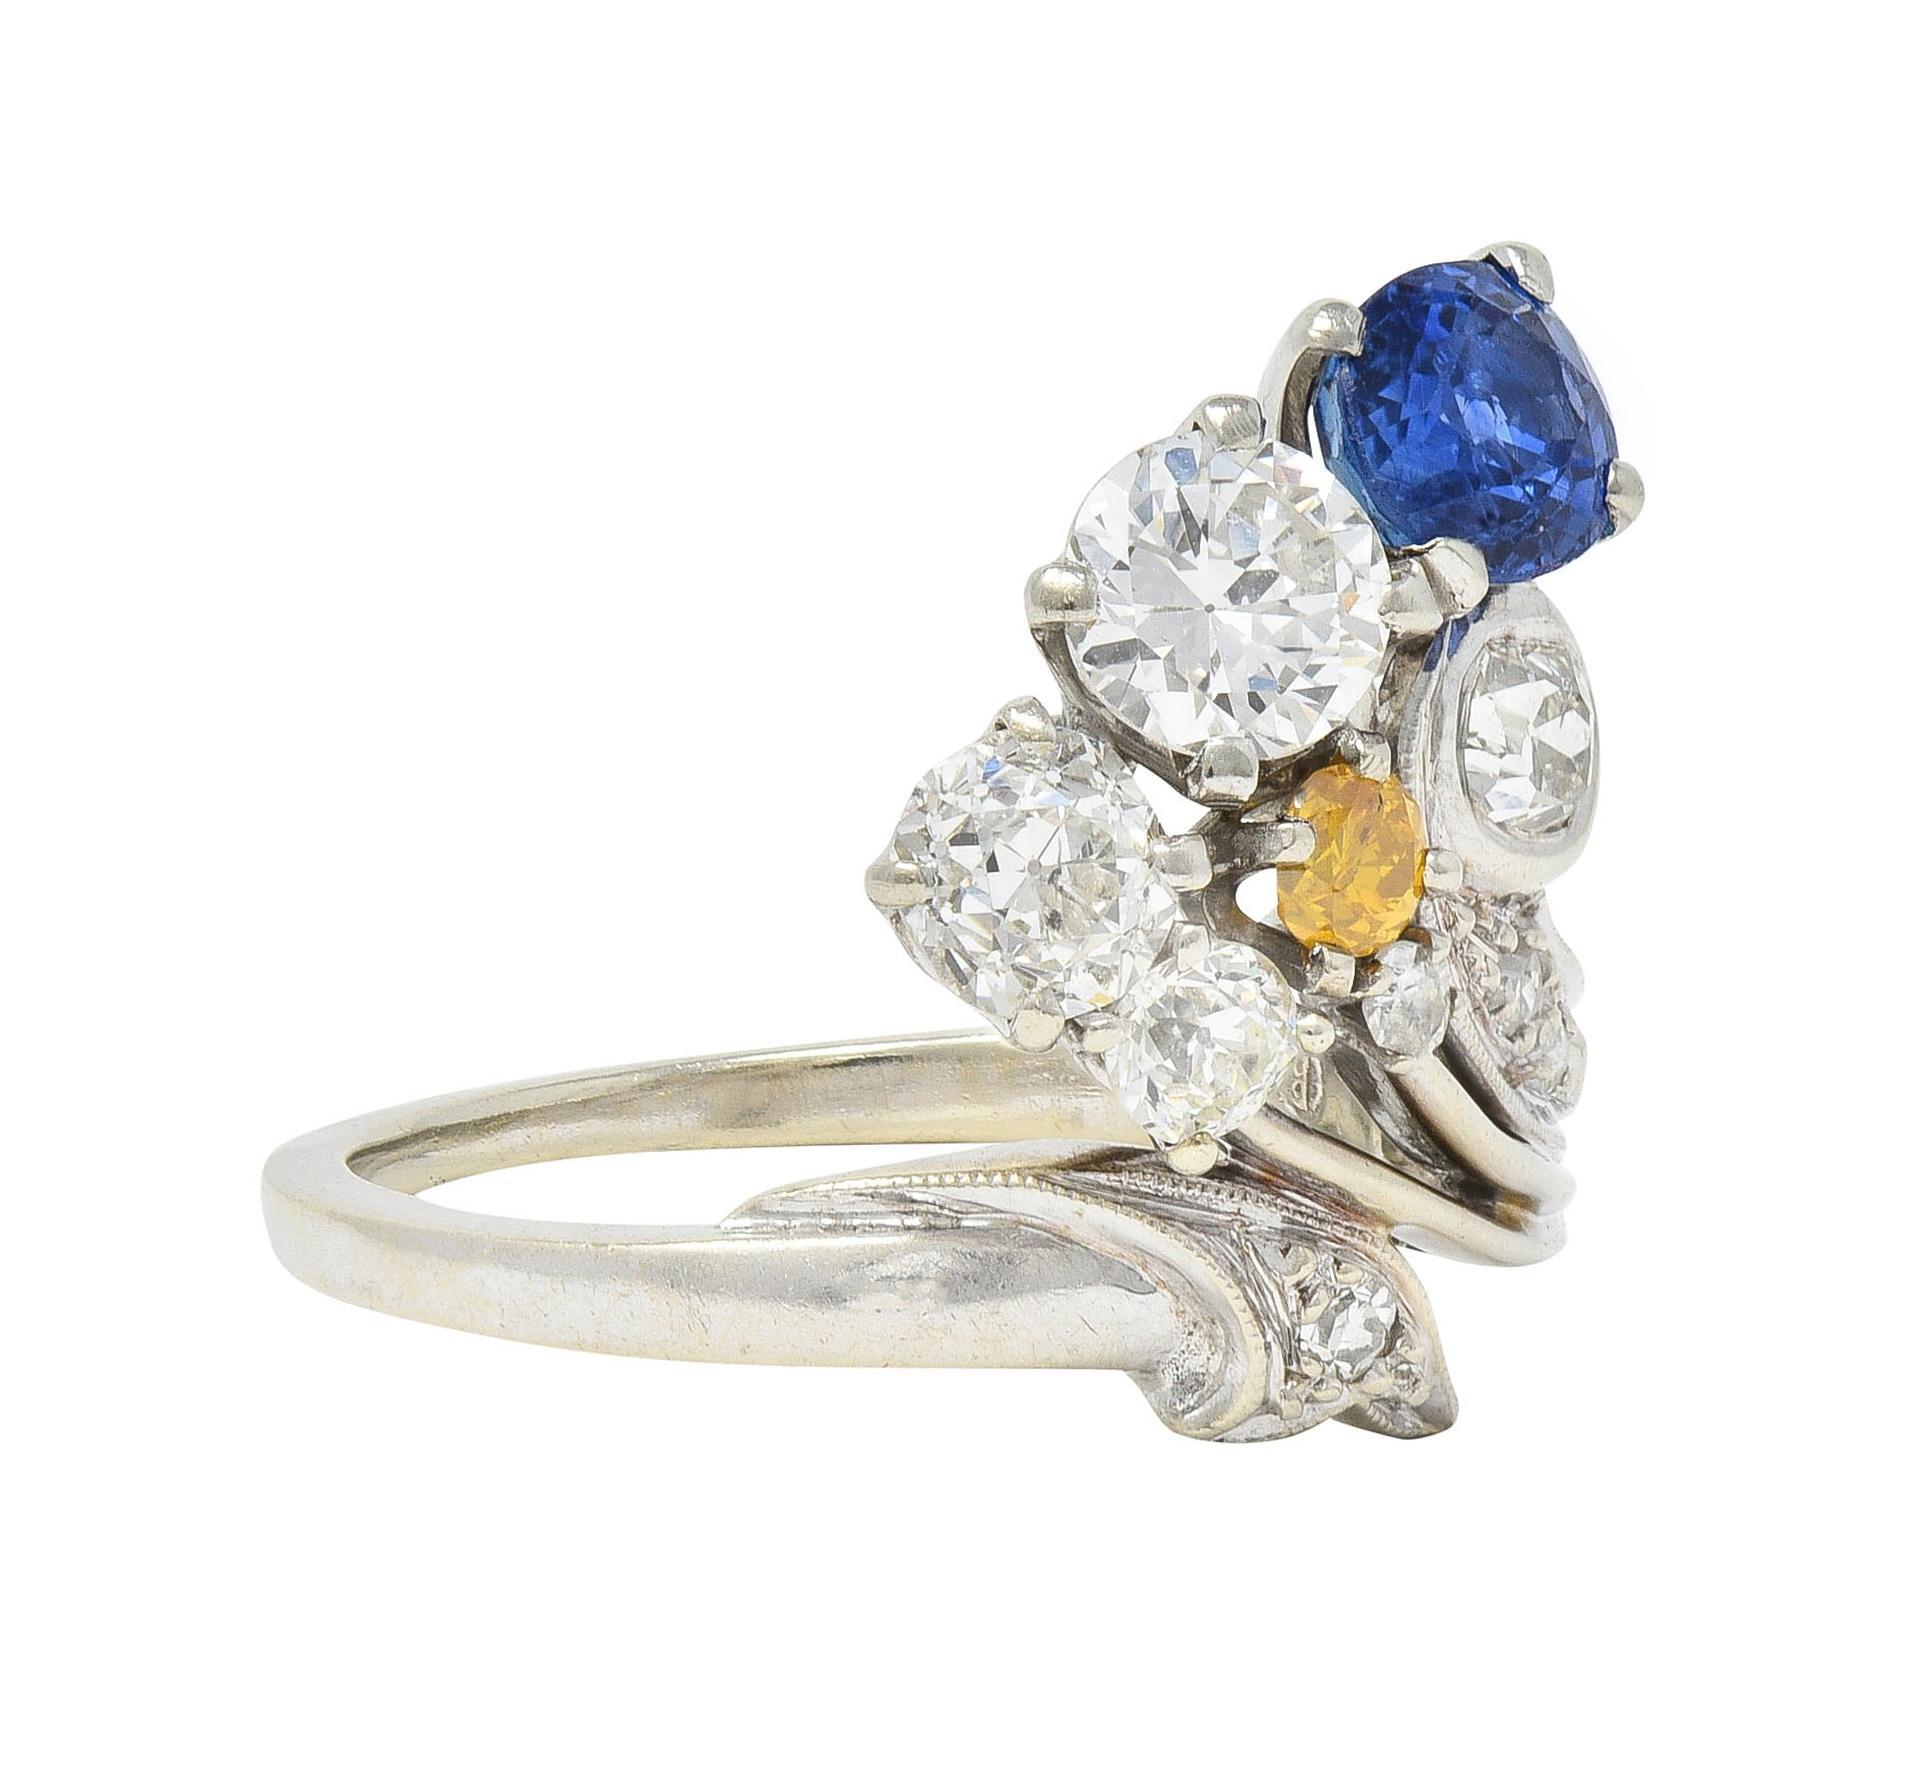 Bypass-style ring terminating with a fanning plume and foliate with clustered sapphires and diamonds
Sapphires are round cut and weigh approximately 0.82 carat total - prong set
One is transparent medium bright blue, and the other is medium yellow